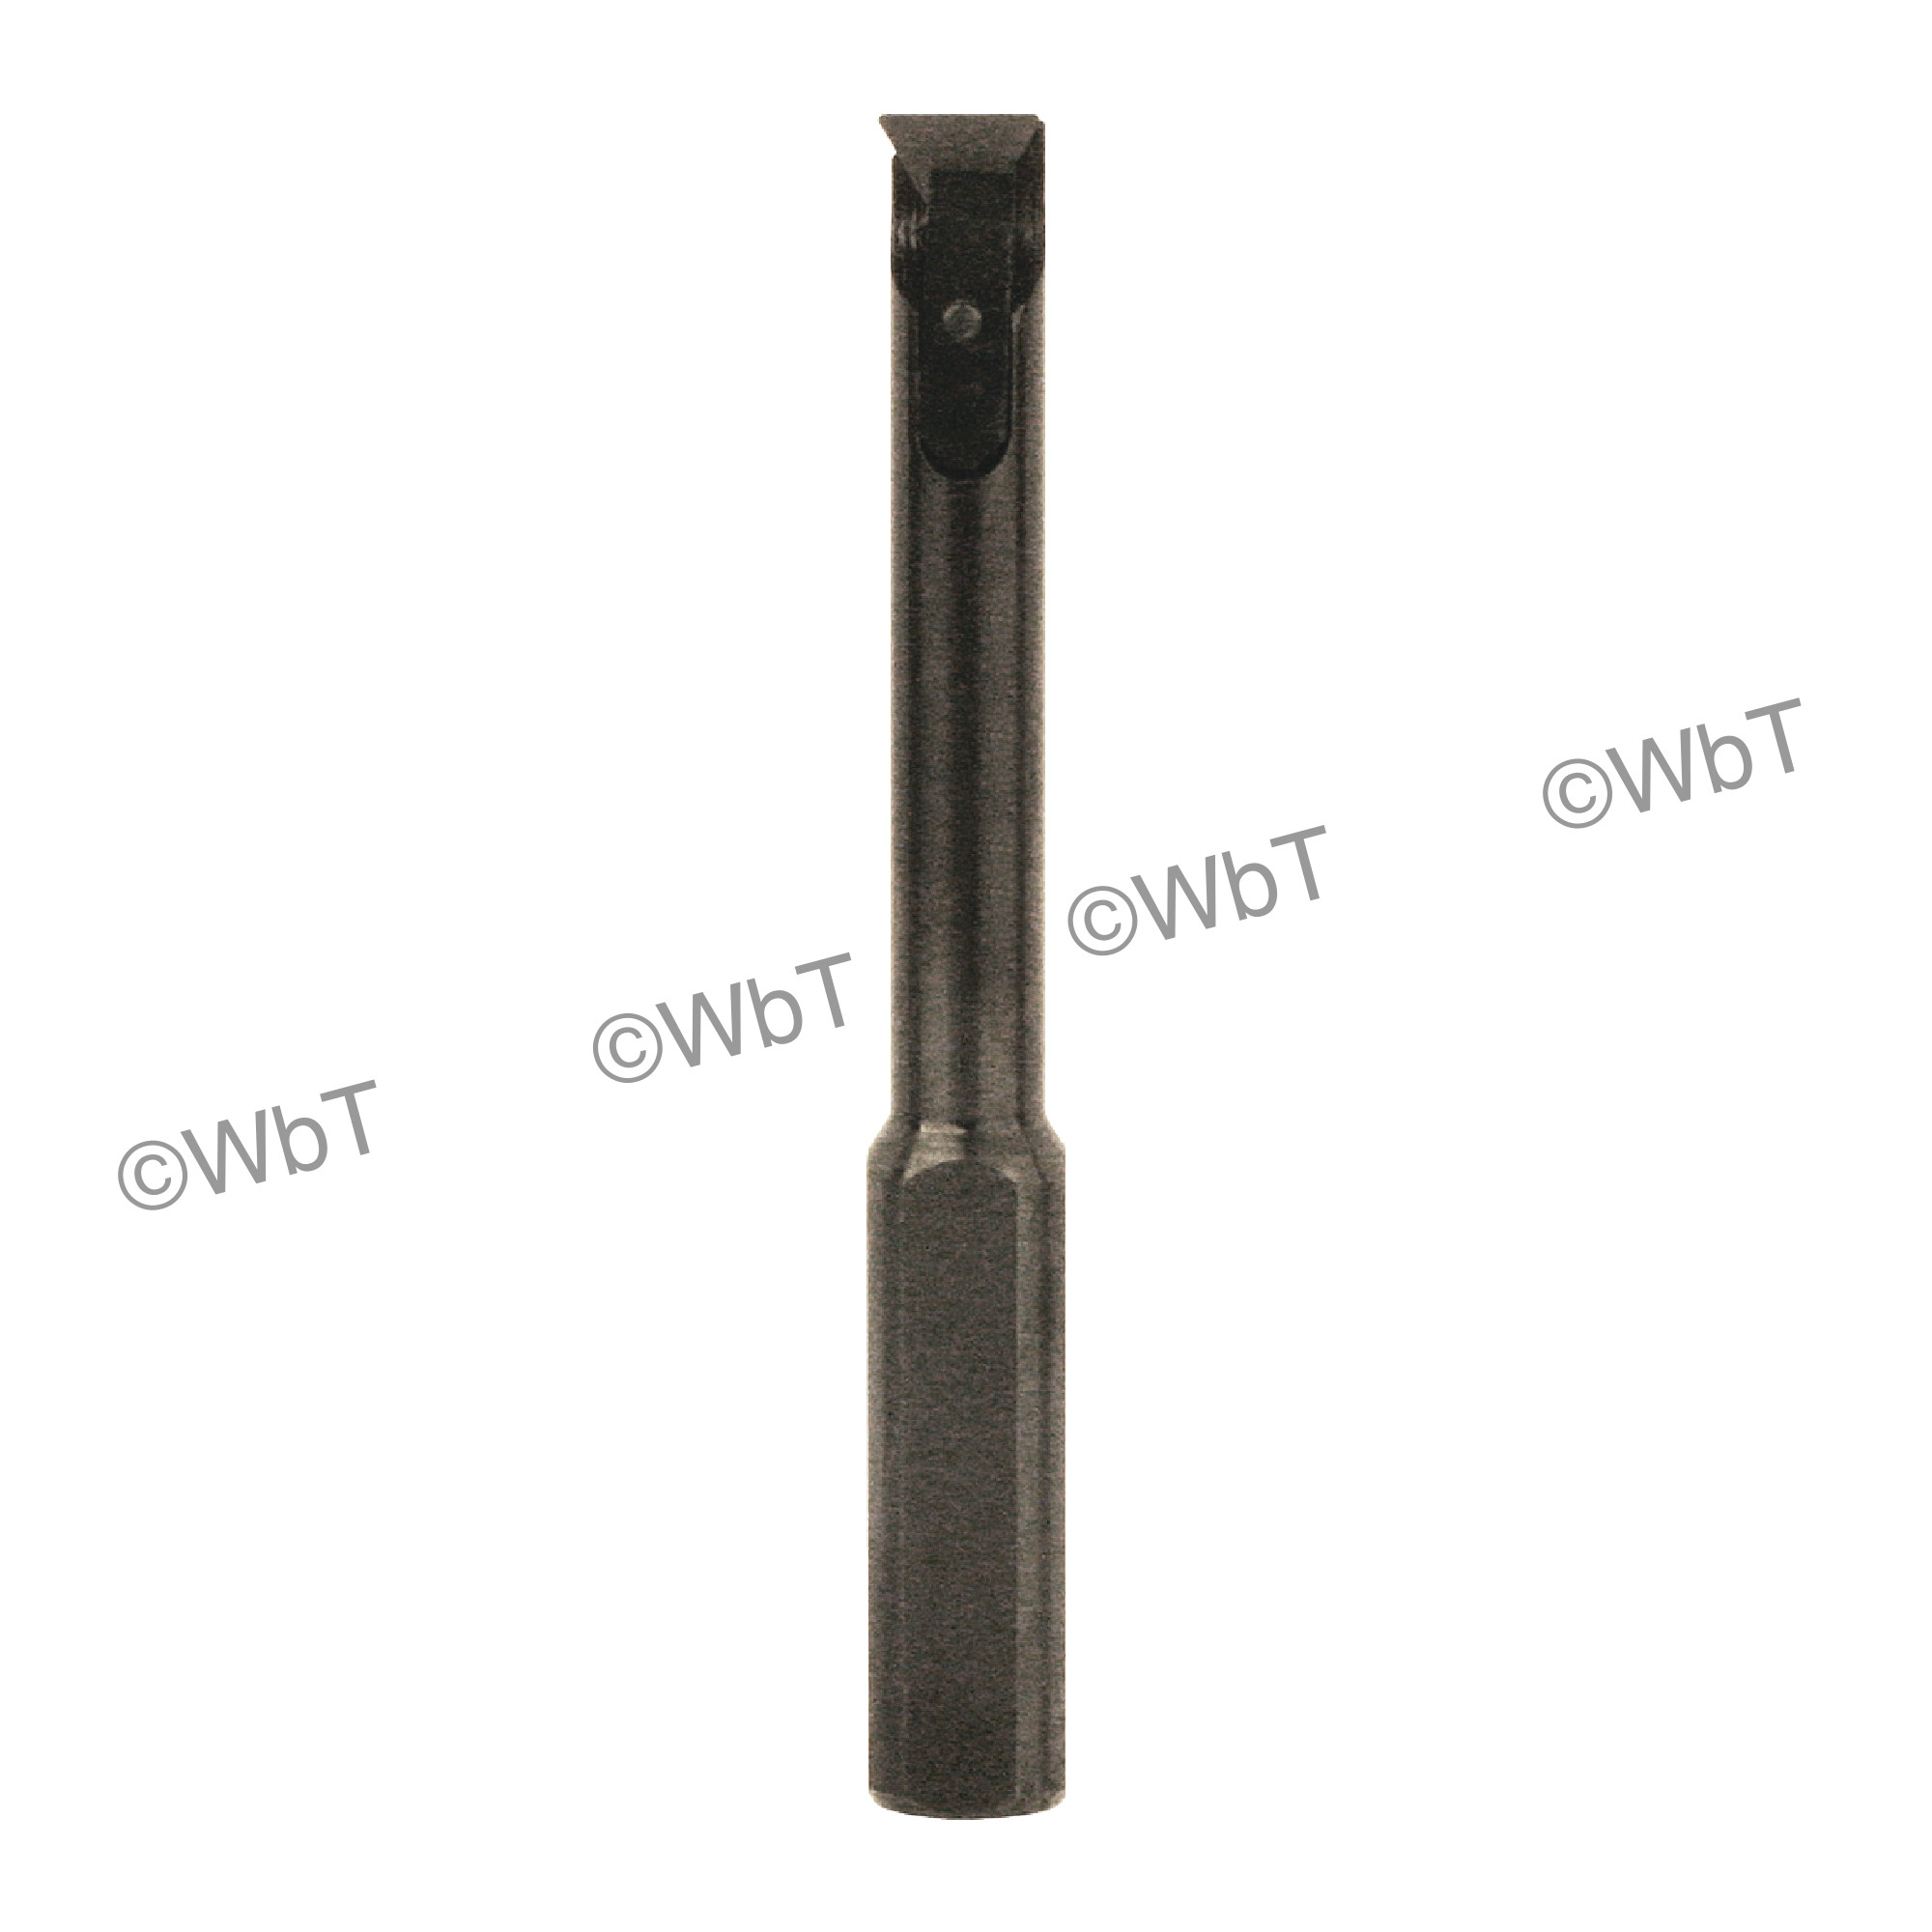 ROUSE - C375L Boring Bar / 0.500" Shank / 2.25" Length of Cut / TPEE73_ Inserts / Right Hand